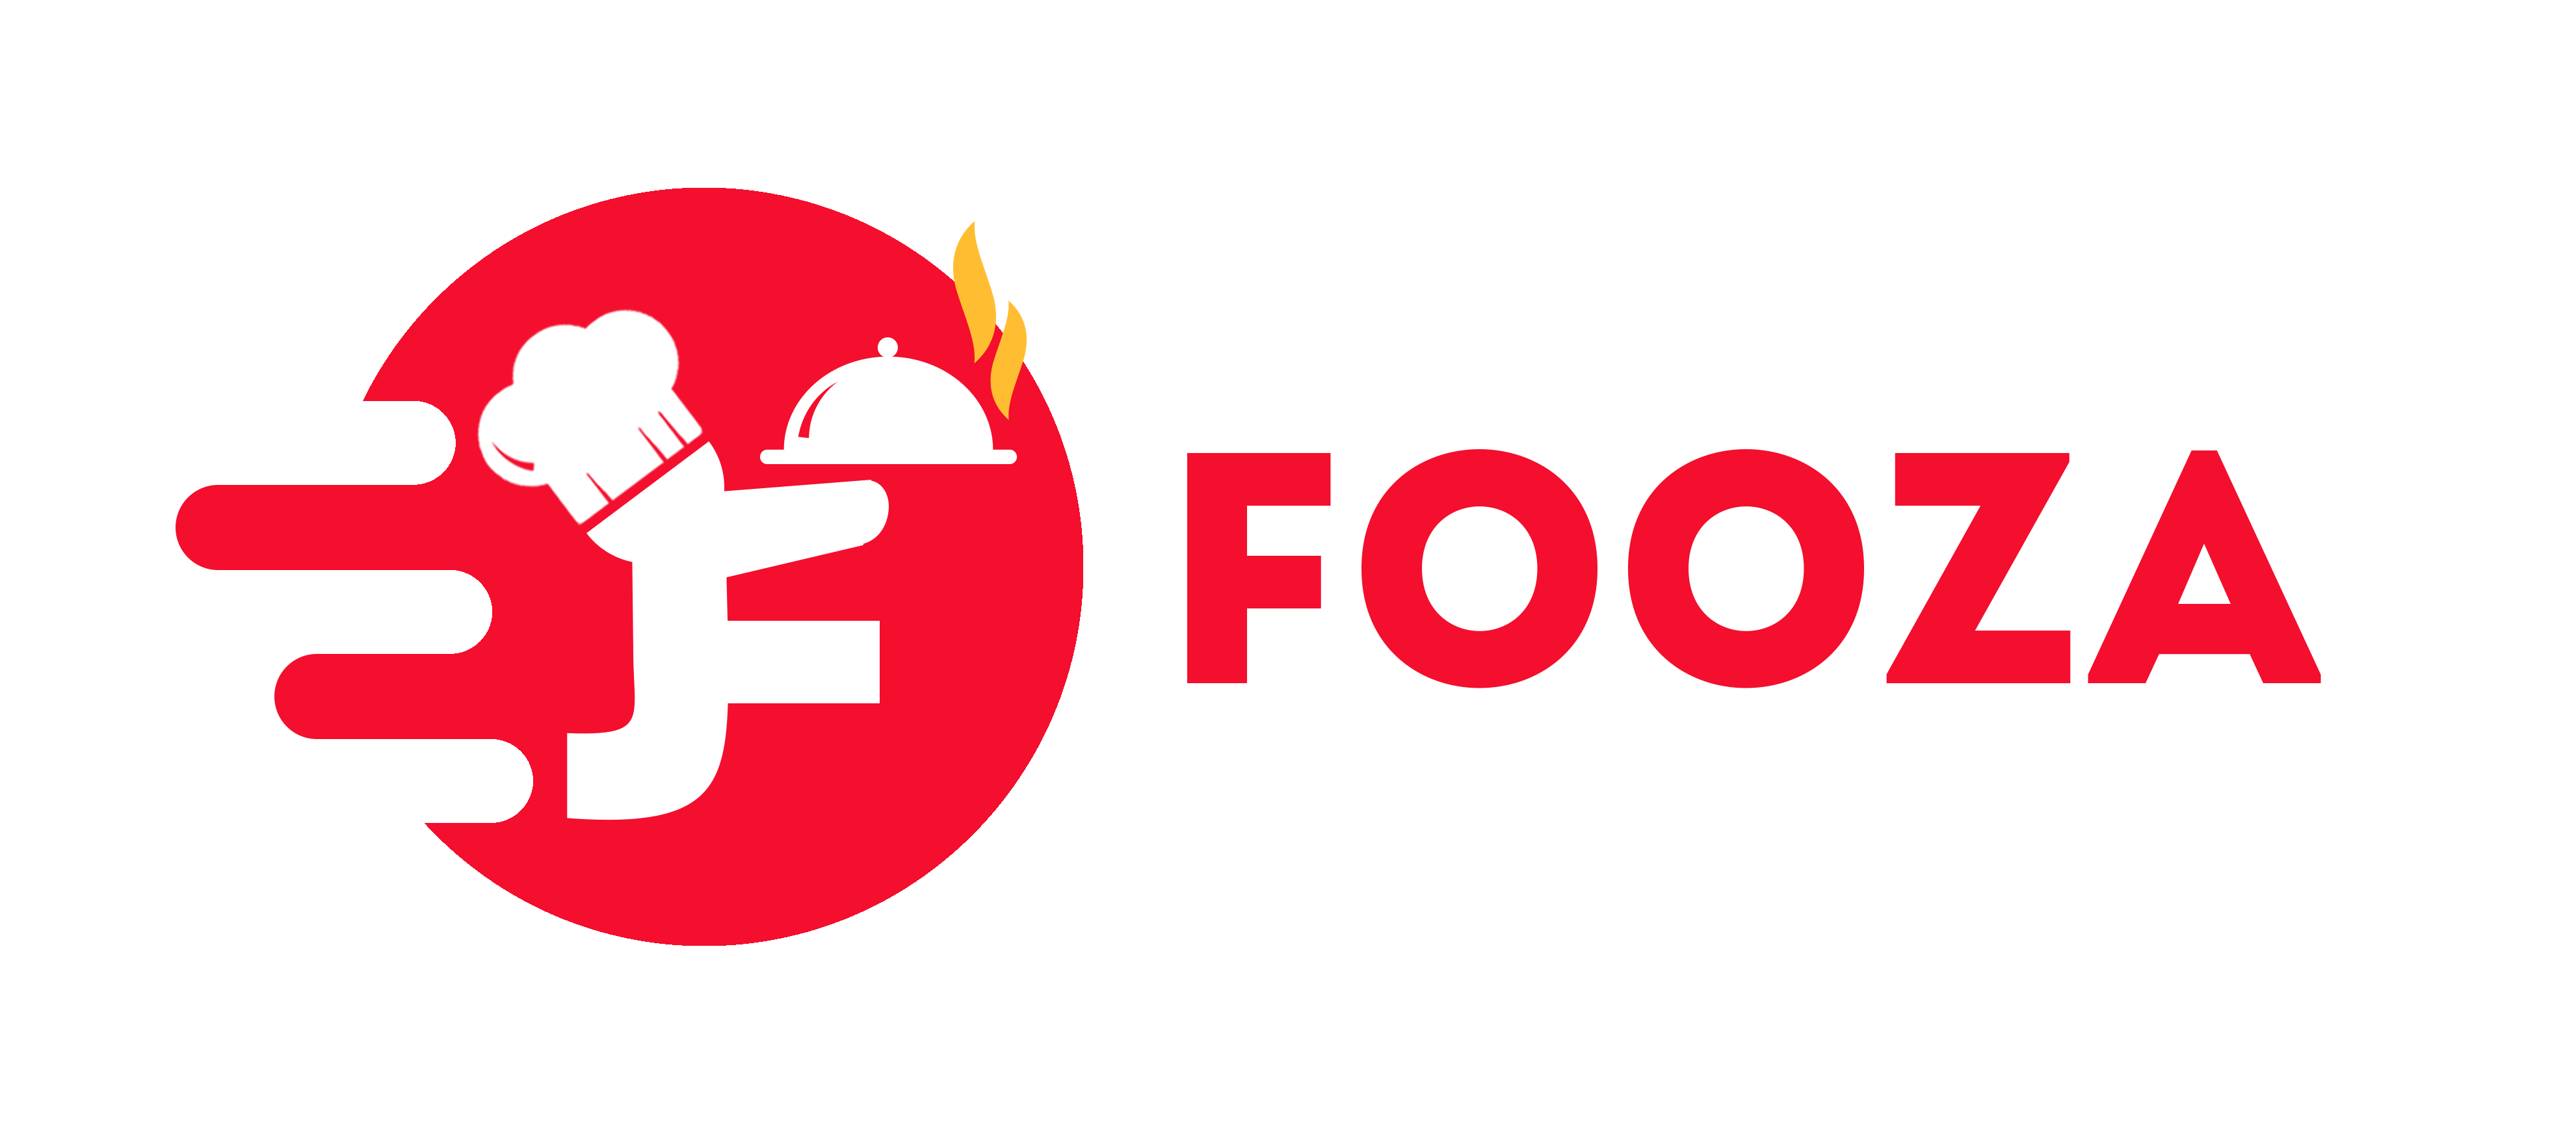 Online Food Delivery Platform Fooza Foods Private Limited Completed 100 Days